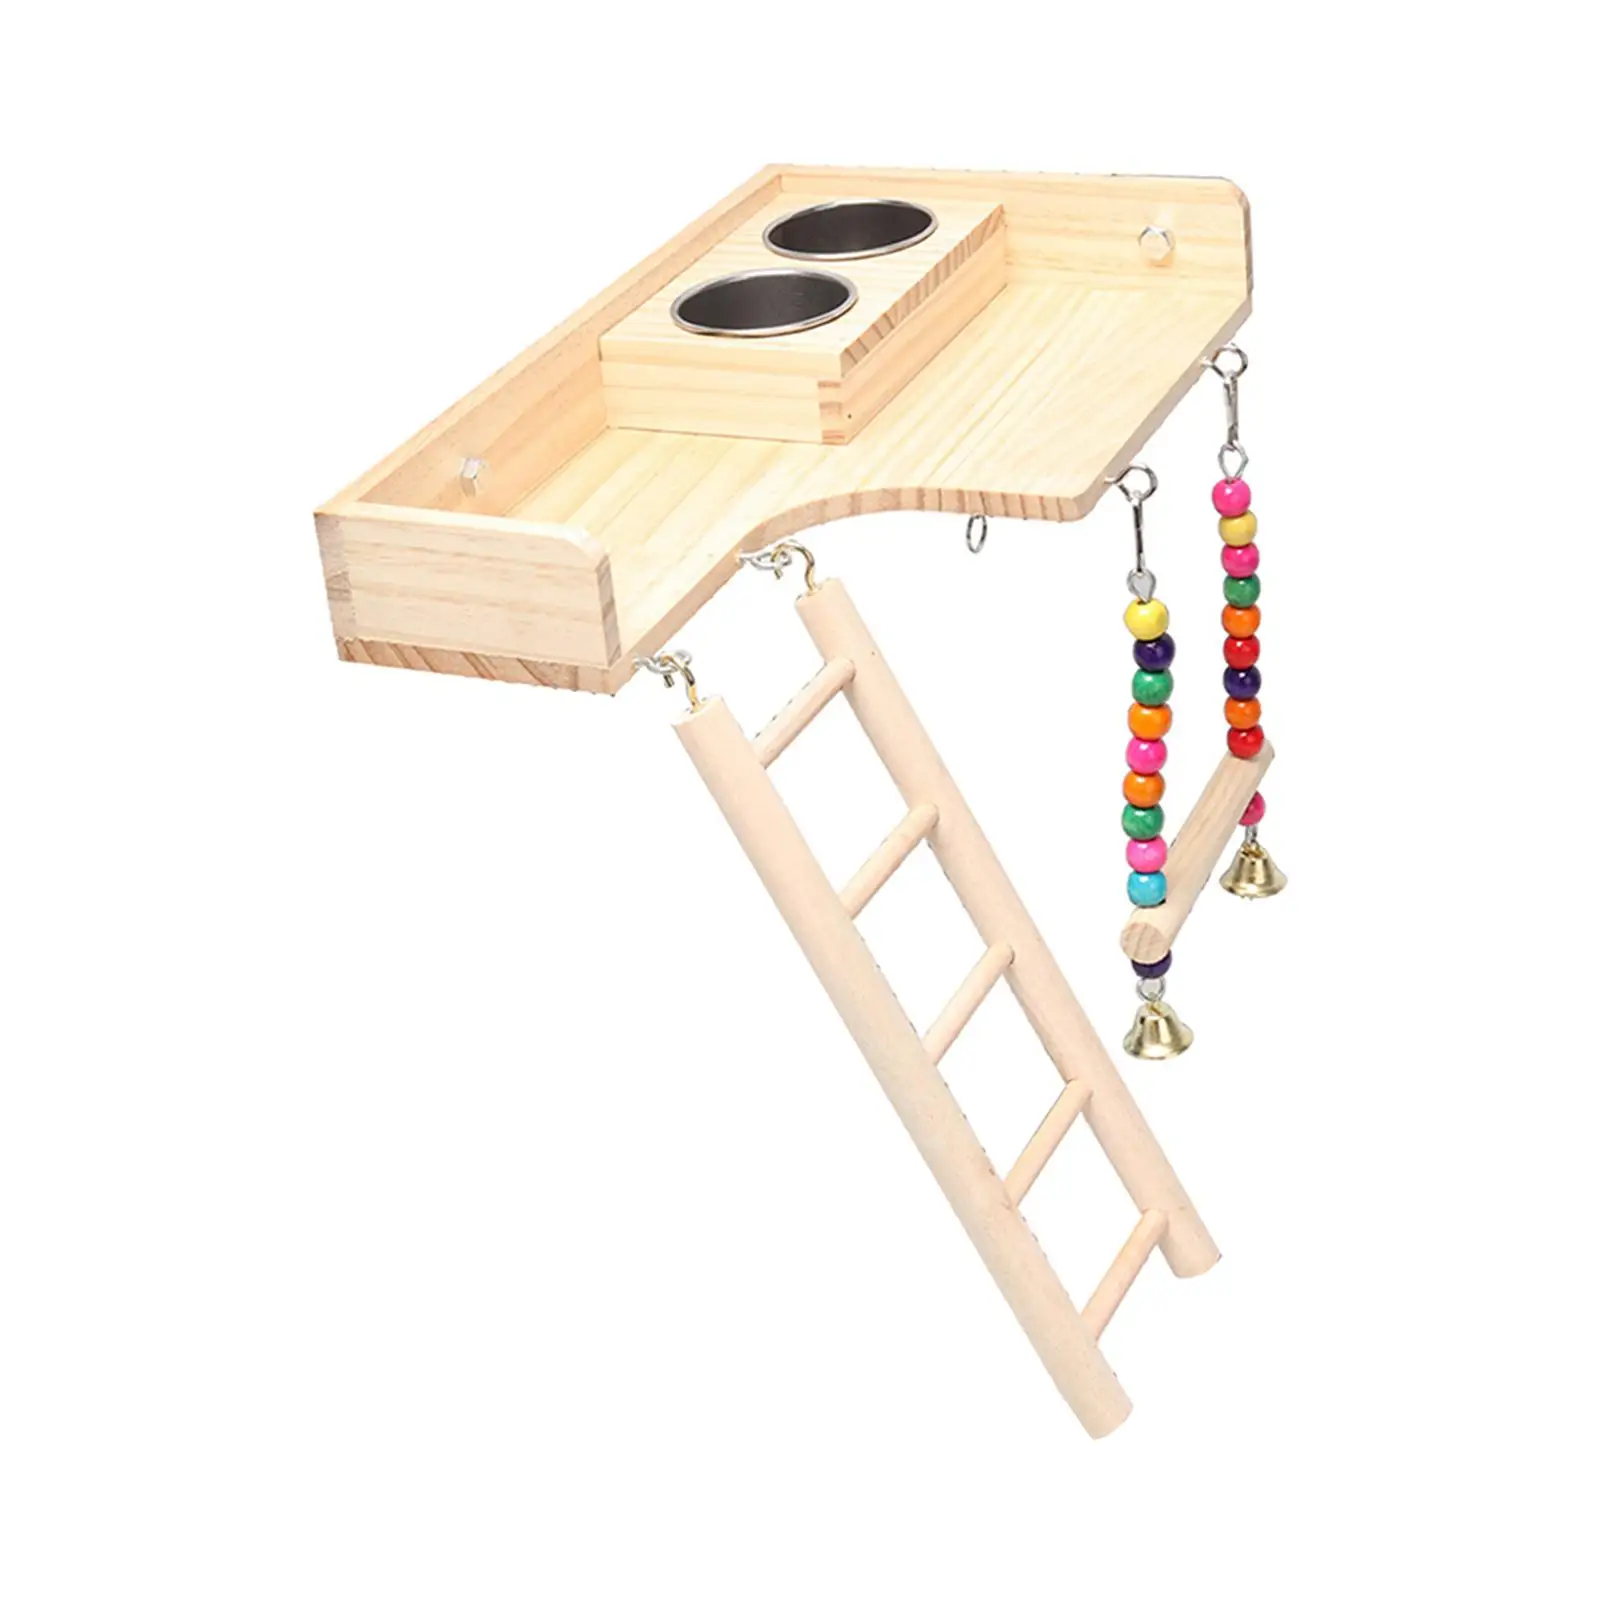 Pet Bird Parrot Playground Wooden Ladder Toy with 2 Cups for Parakeets Cockatiels Interactive Accessory Simple Installation